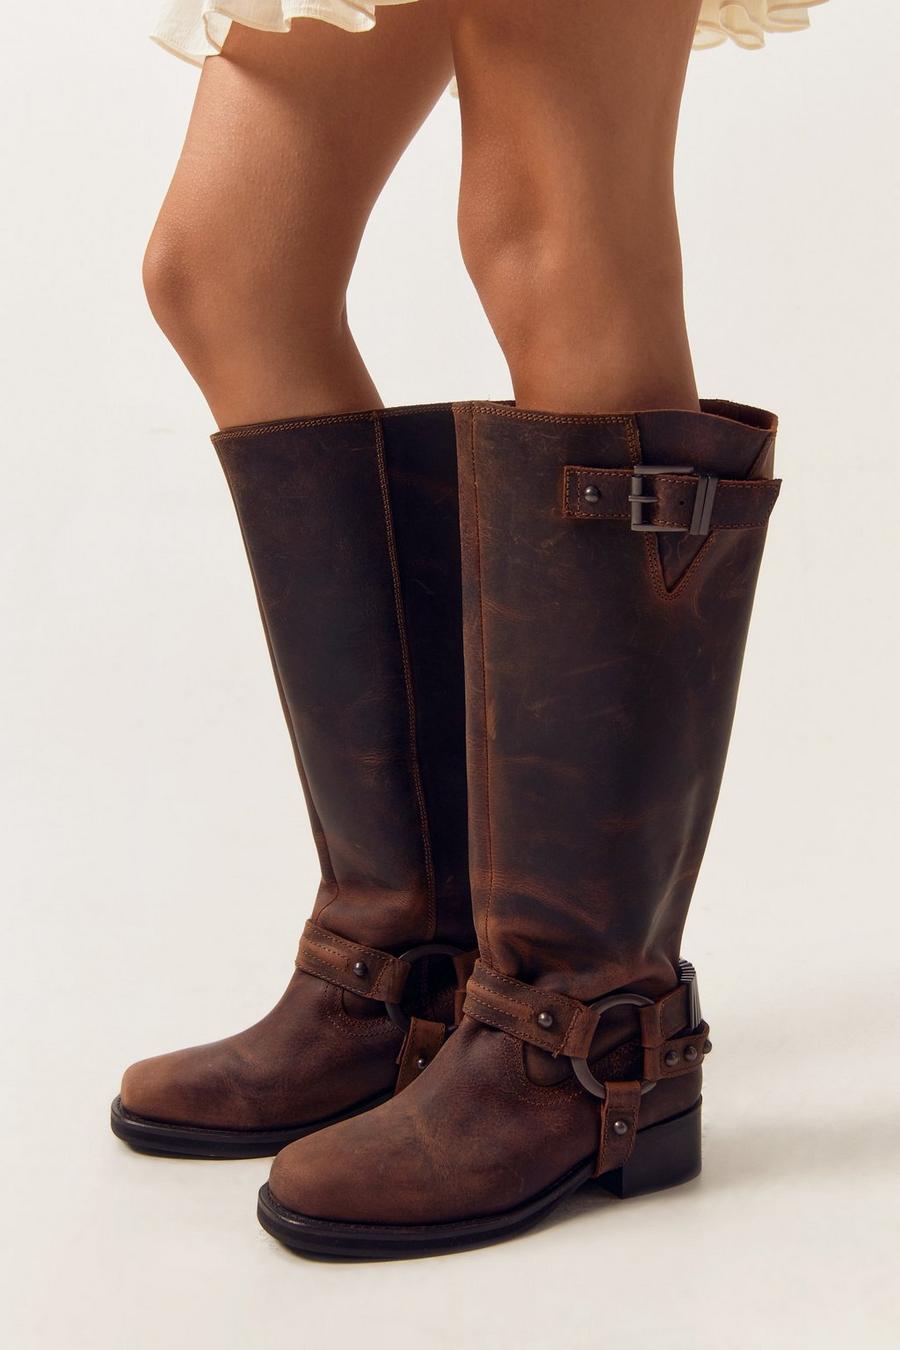 Tan Tarnished Leather Buckle Harness Knee High Boots